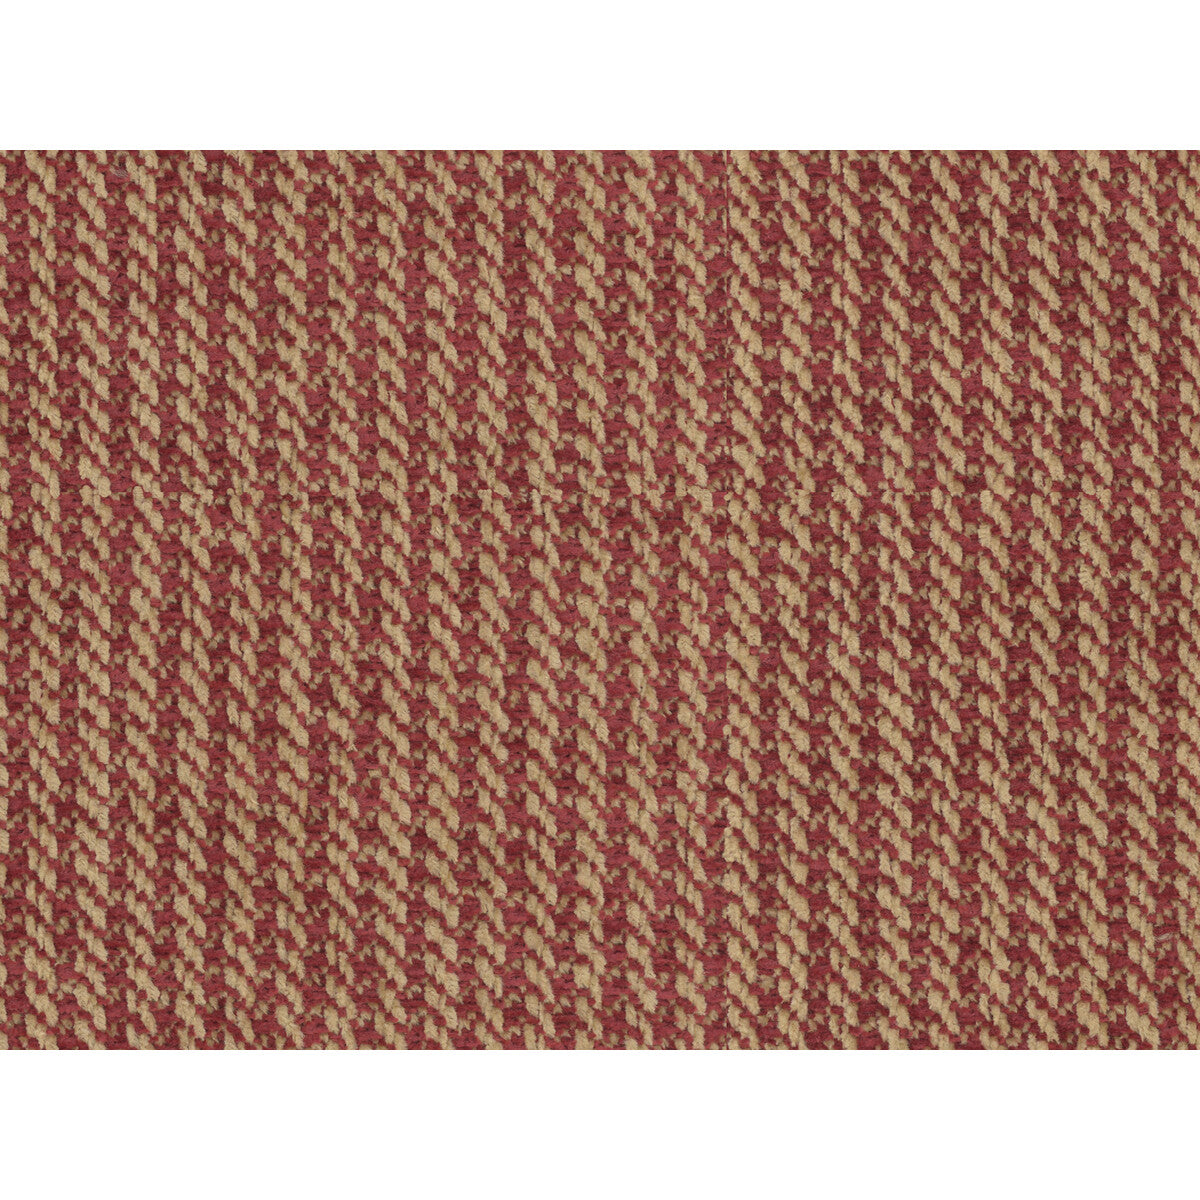 Granier Chenille fabric in garnet color - pattern 8016105.19.0 - by Brunschwig &amp; Fils in the Chambery Textures collection